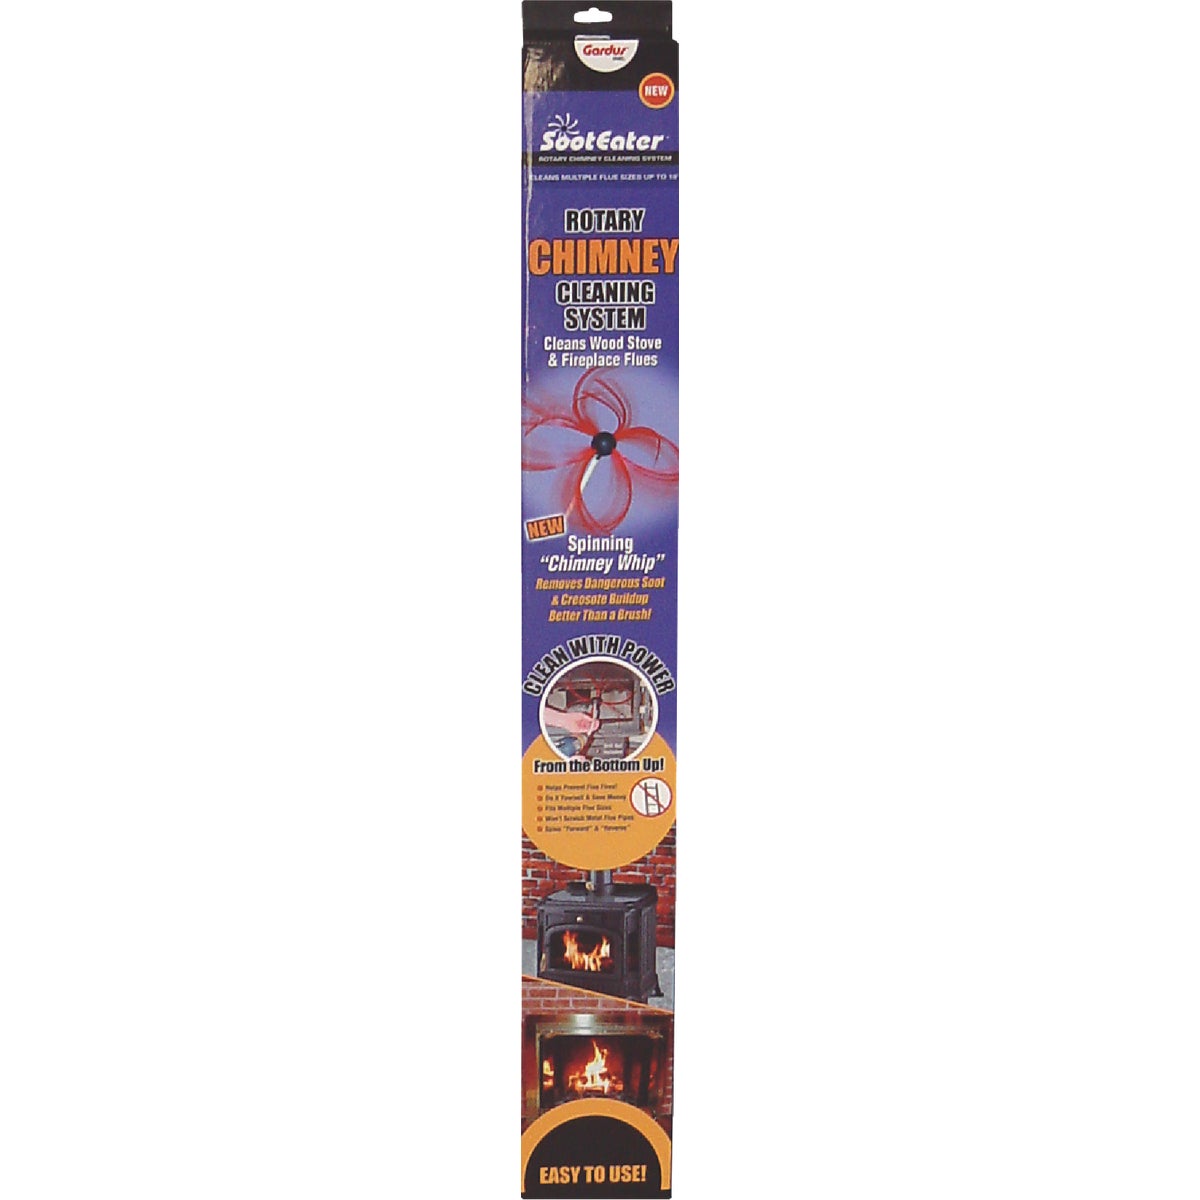 Item 454902, SootEater rotary chimney cleaning system cleans wood stove and fireplace 